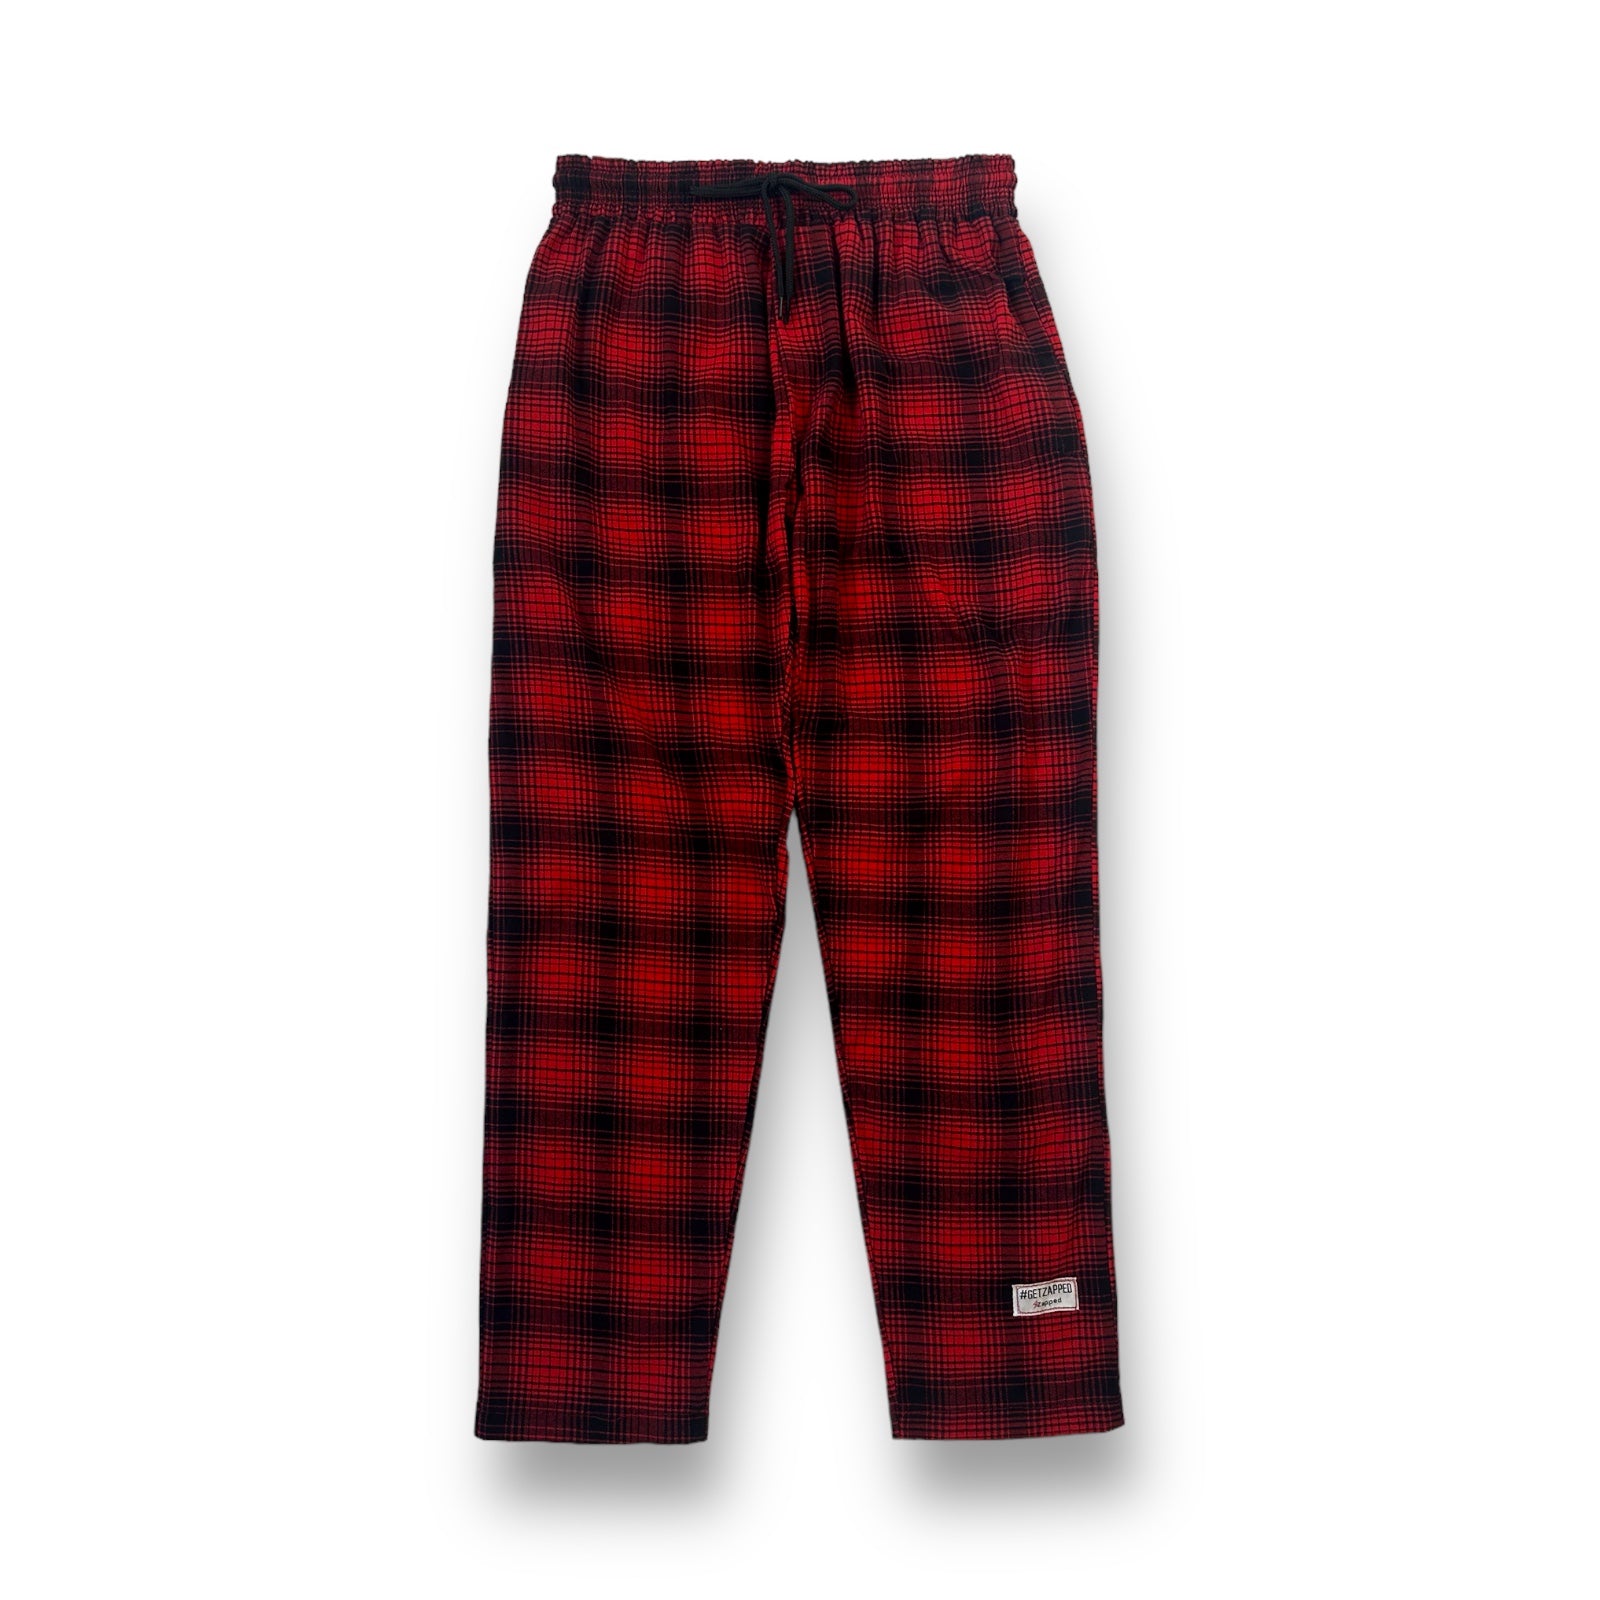 Zapped Loose Fit Plaid Cord Pant - Red Black